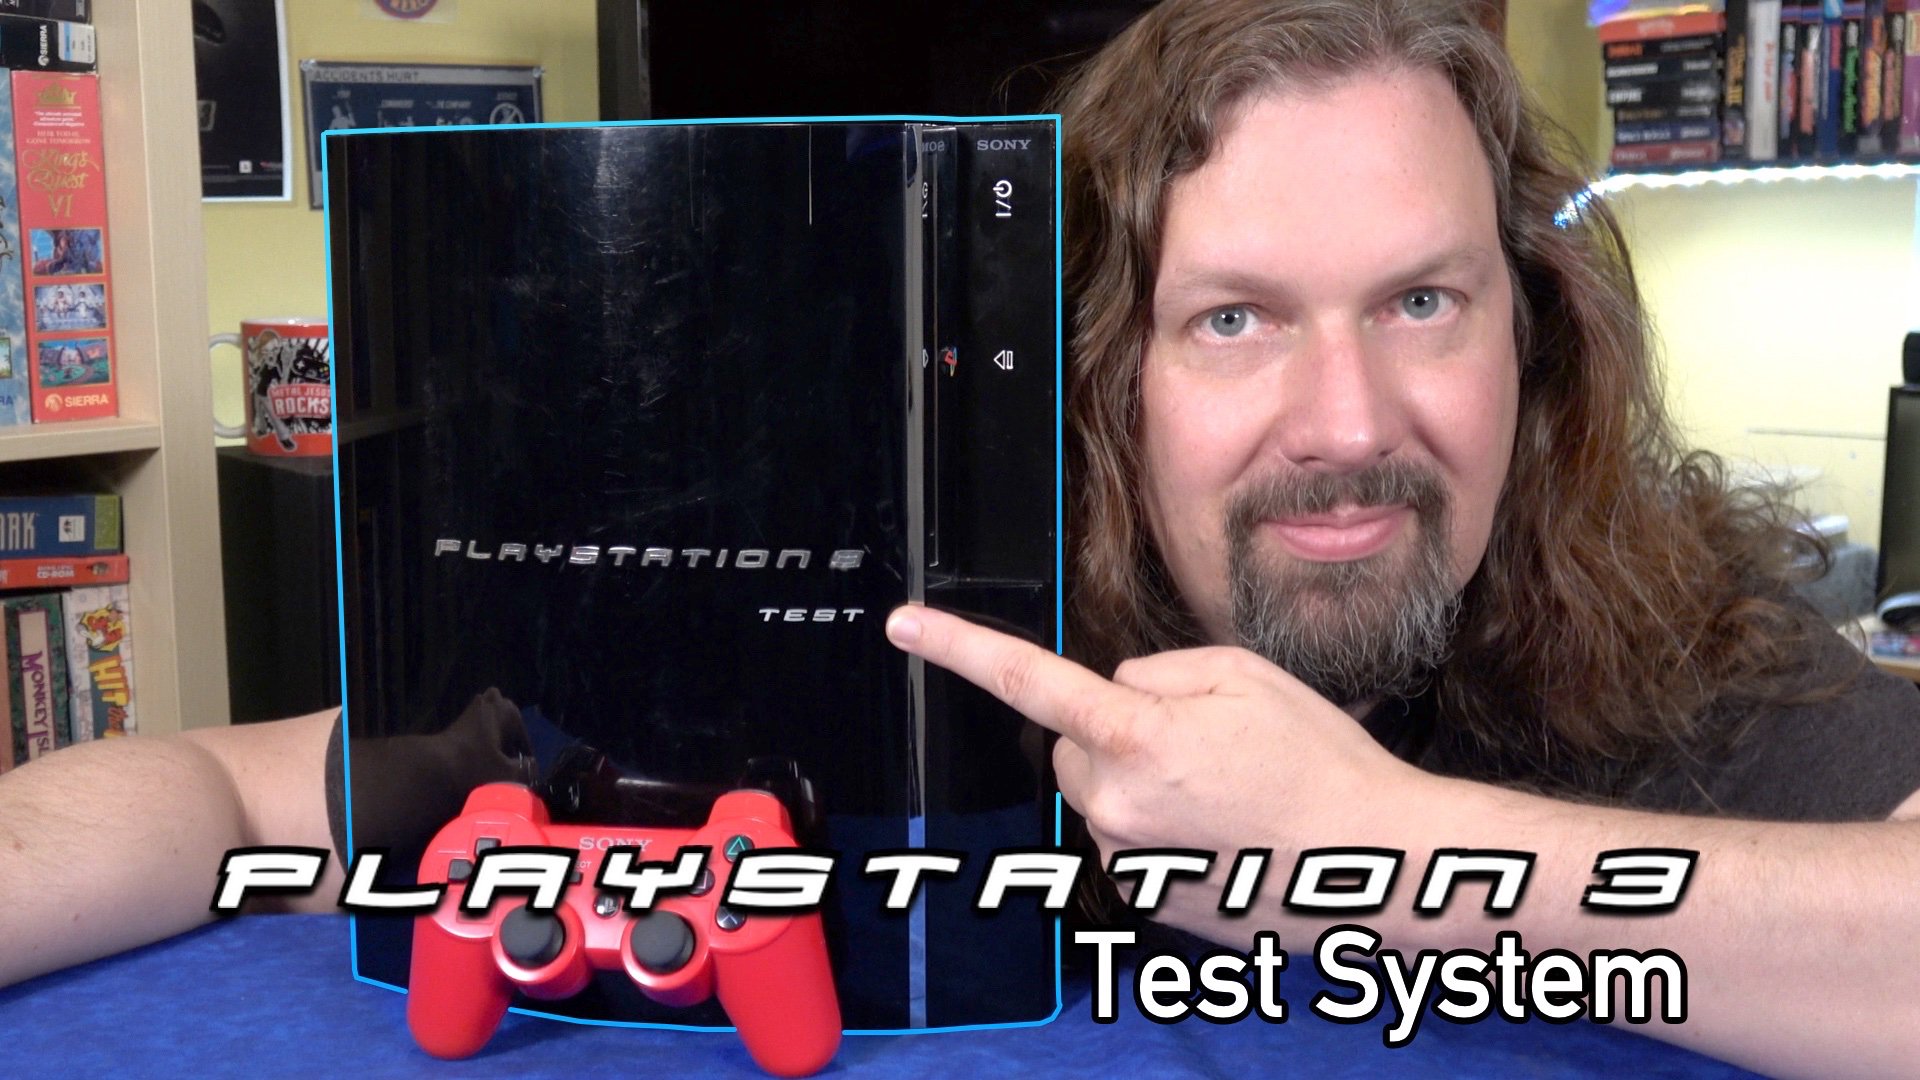 Metal Jesus Rocks on Twitter: "PS3 Test system - PS1, PS2 &amp; PS3 Games (All Regions) Developer Tools. Is it WORTH IT? -- WATCH https://t.co/lGCE5SrgKu https://t.co/ajompfALeF" / Twitter